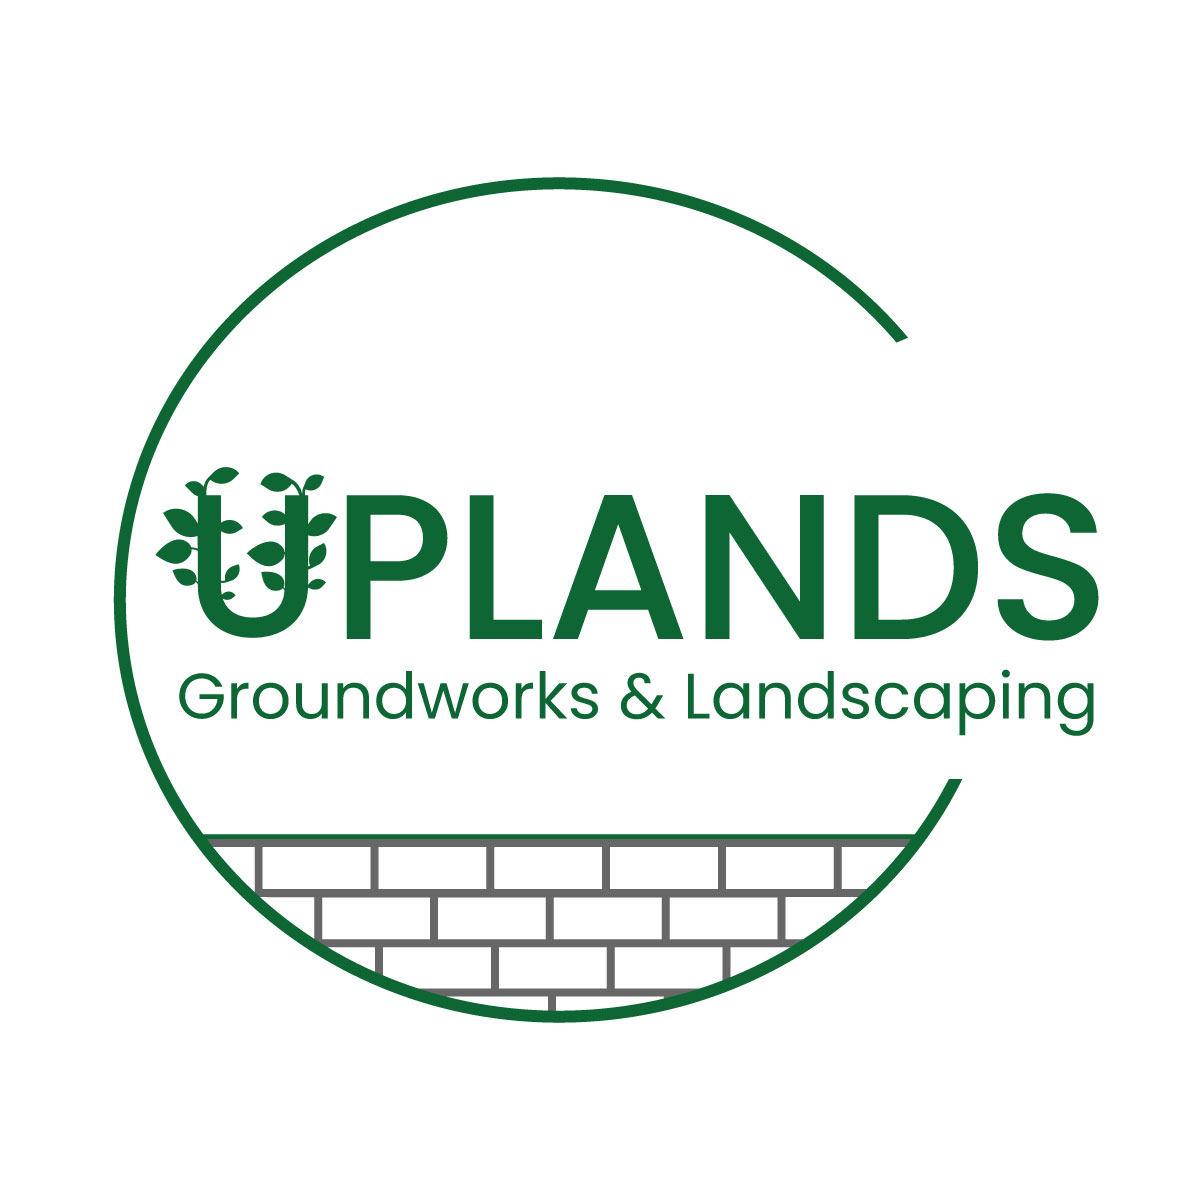 Uplands Groundworks and Landscaping Limited